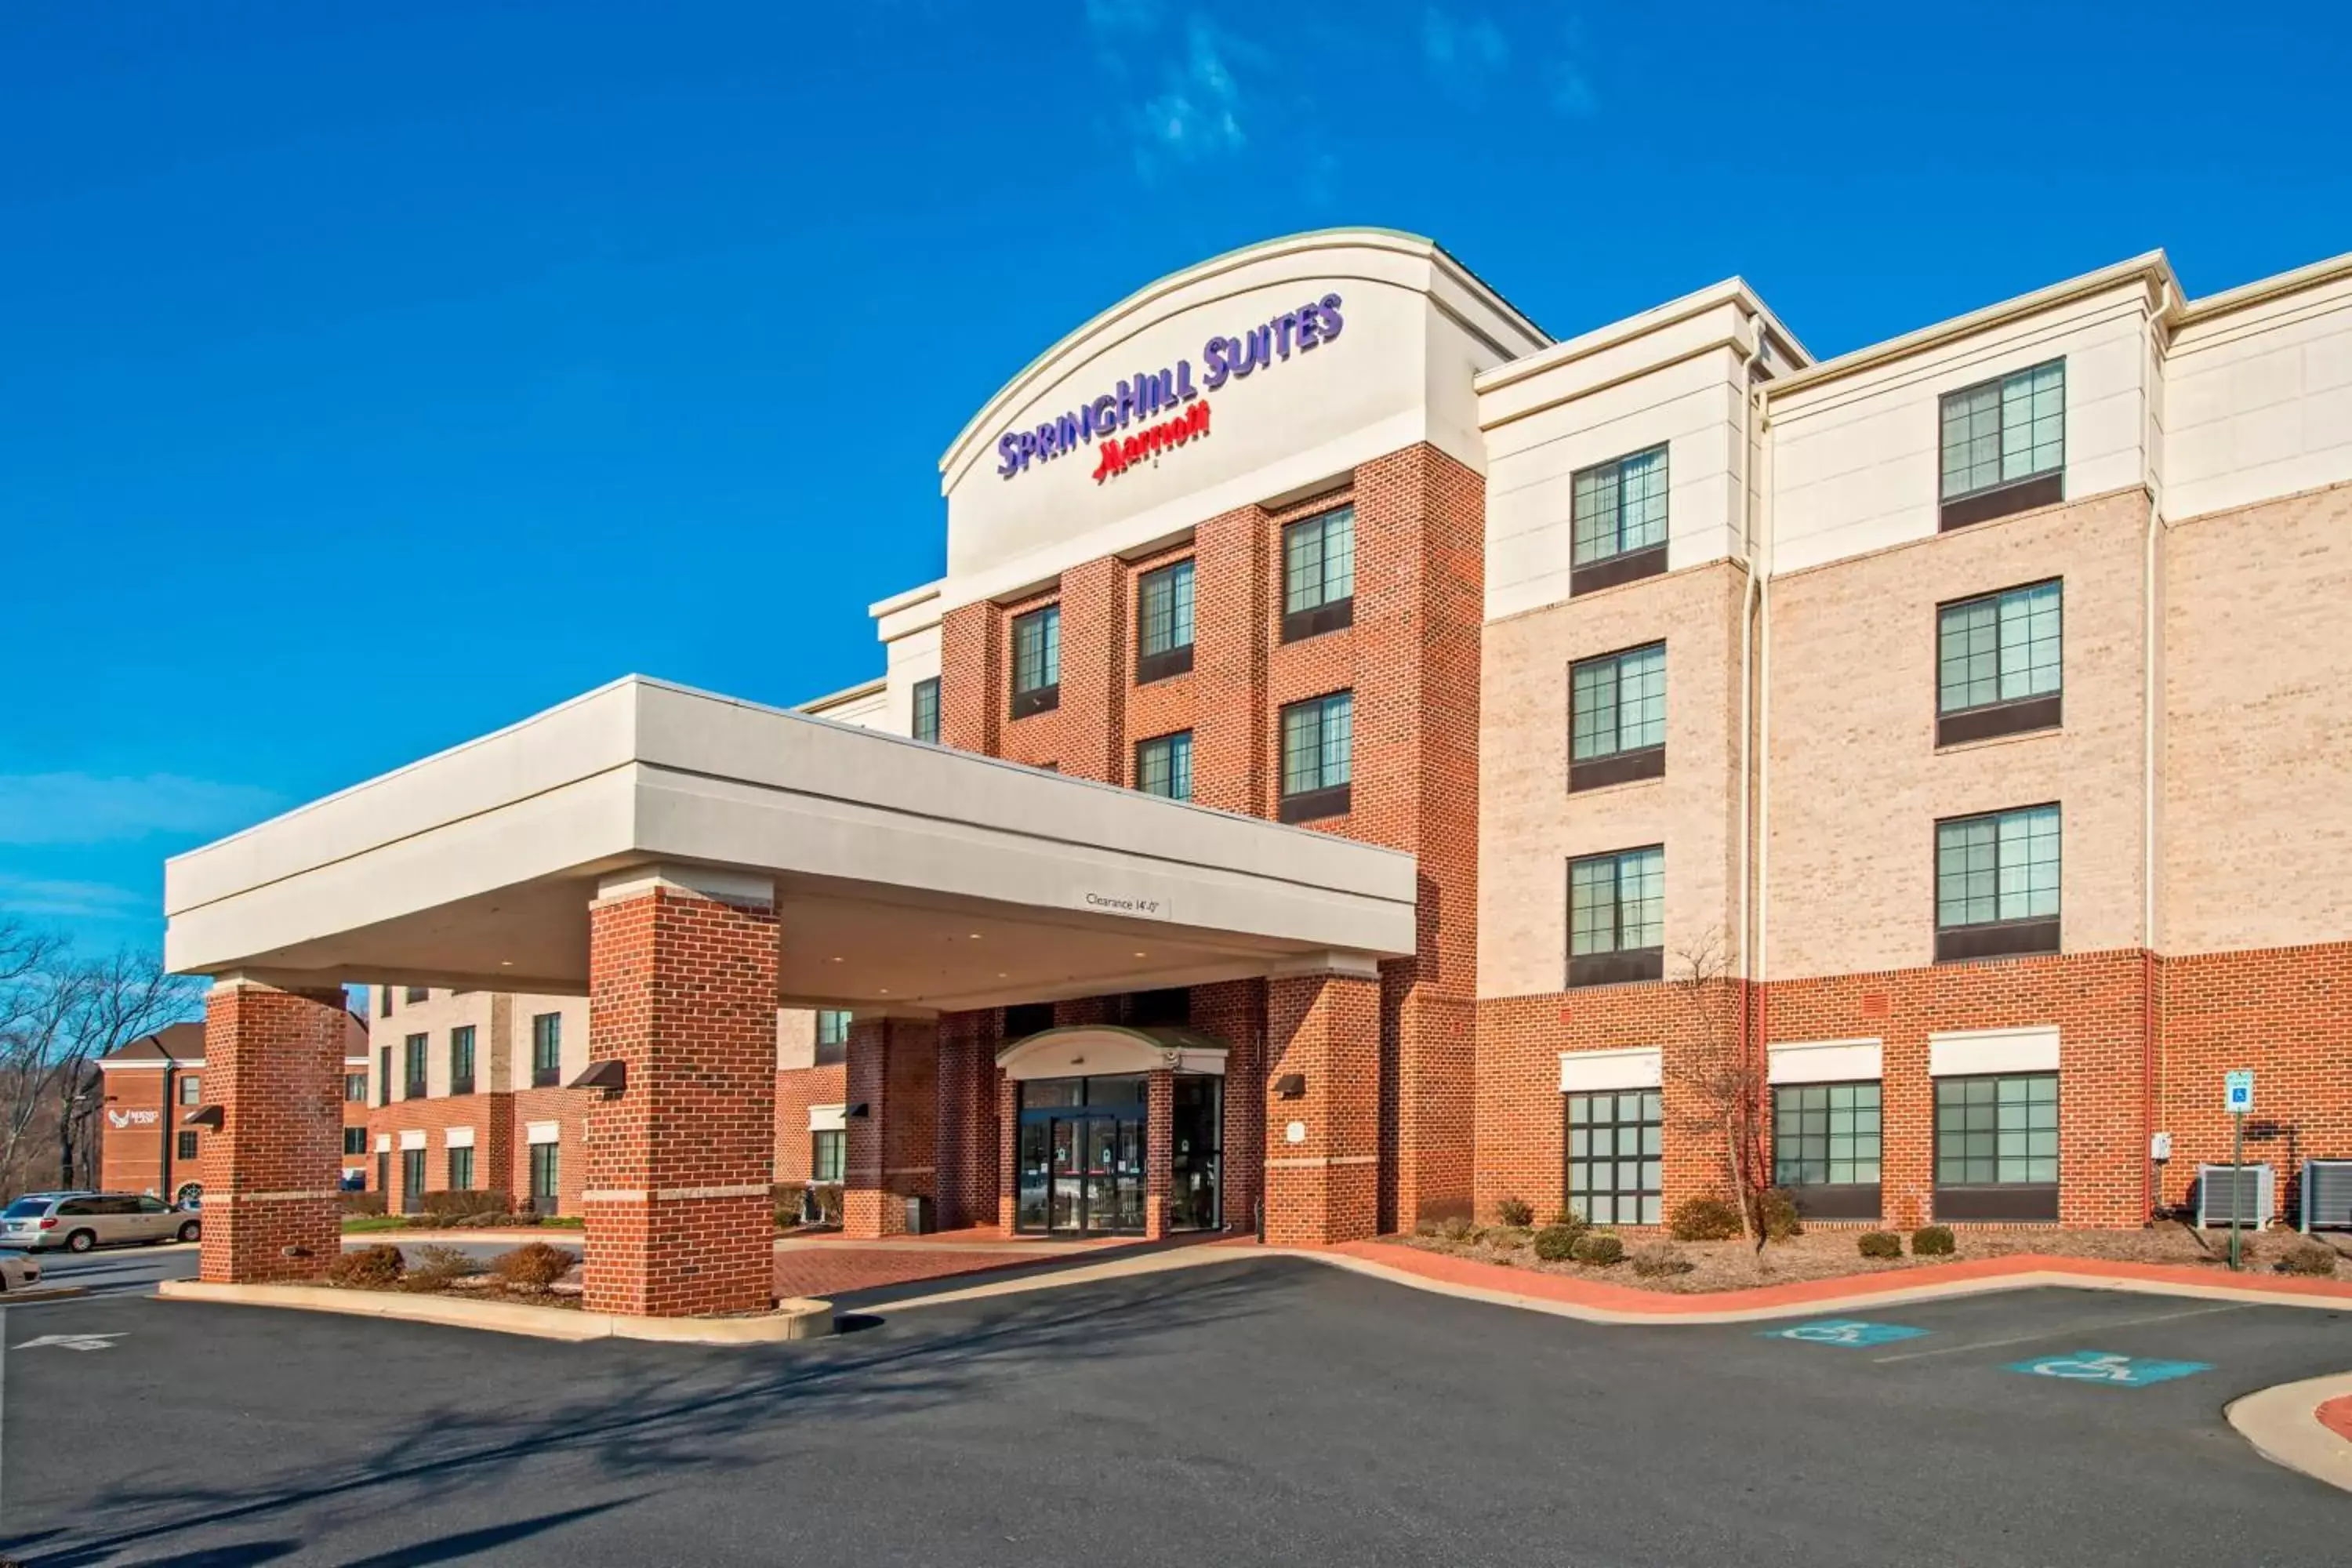 Property Building in SpringHill Suites Prince Frederick